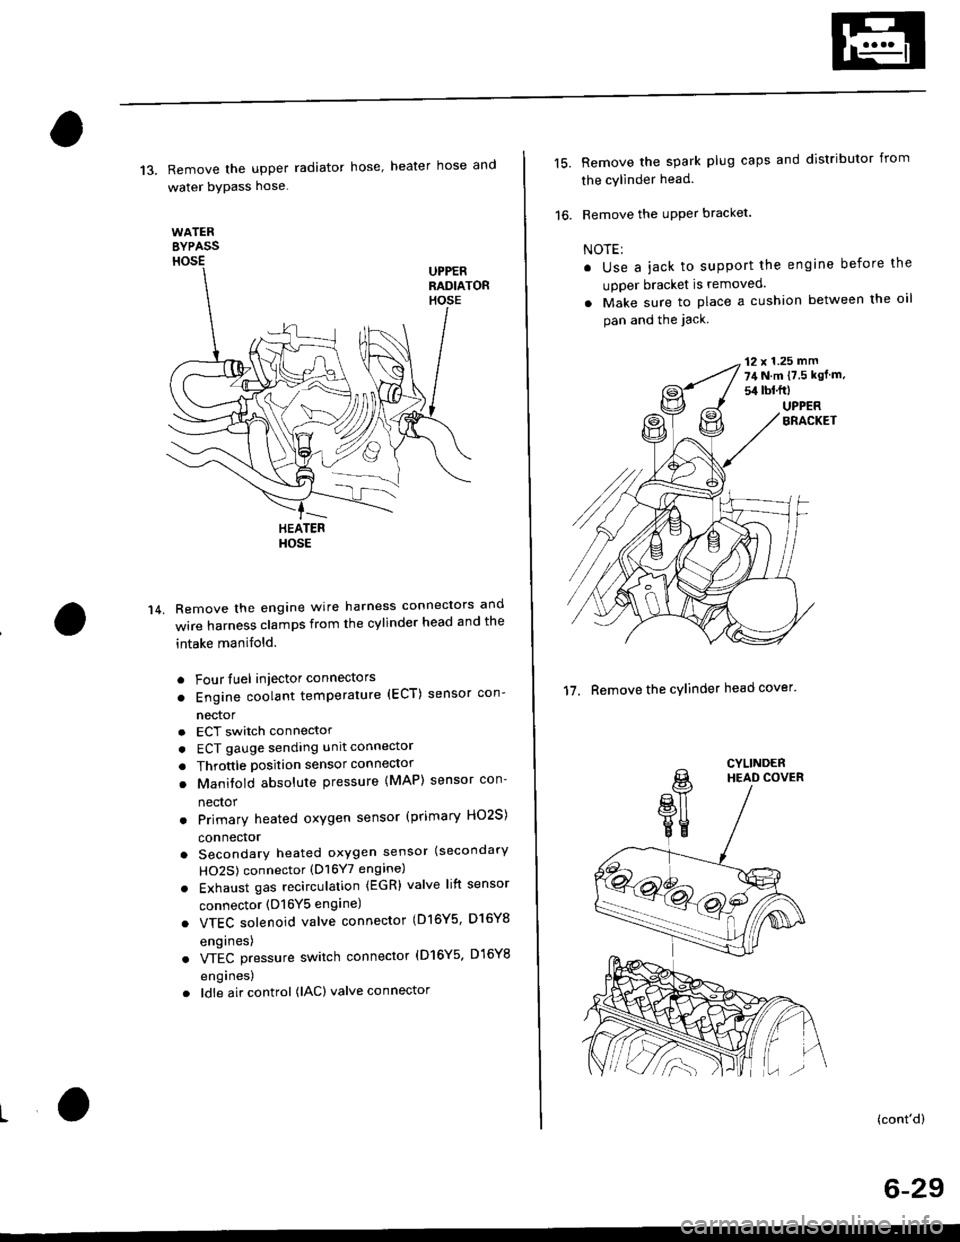 HONDA CIVIC 1997 6.G Workshop Manual 13. Remove the upper radiator hose heater hose and
water bYPass hose
WATEREYPASSHOSEUPPERRADIATORHOSE
14.
HEATERHOSE
Remove the engine wire harness connectors and
wire harness clamps from the cylinde